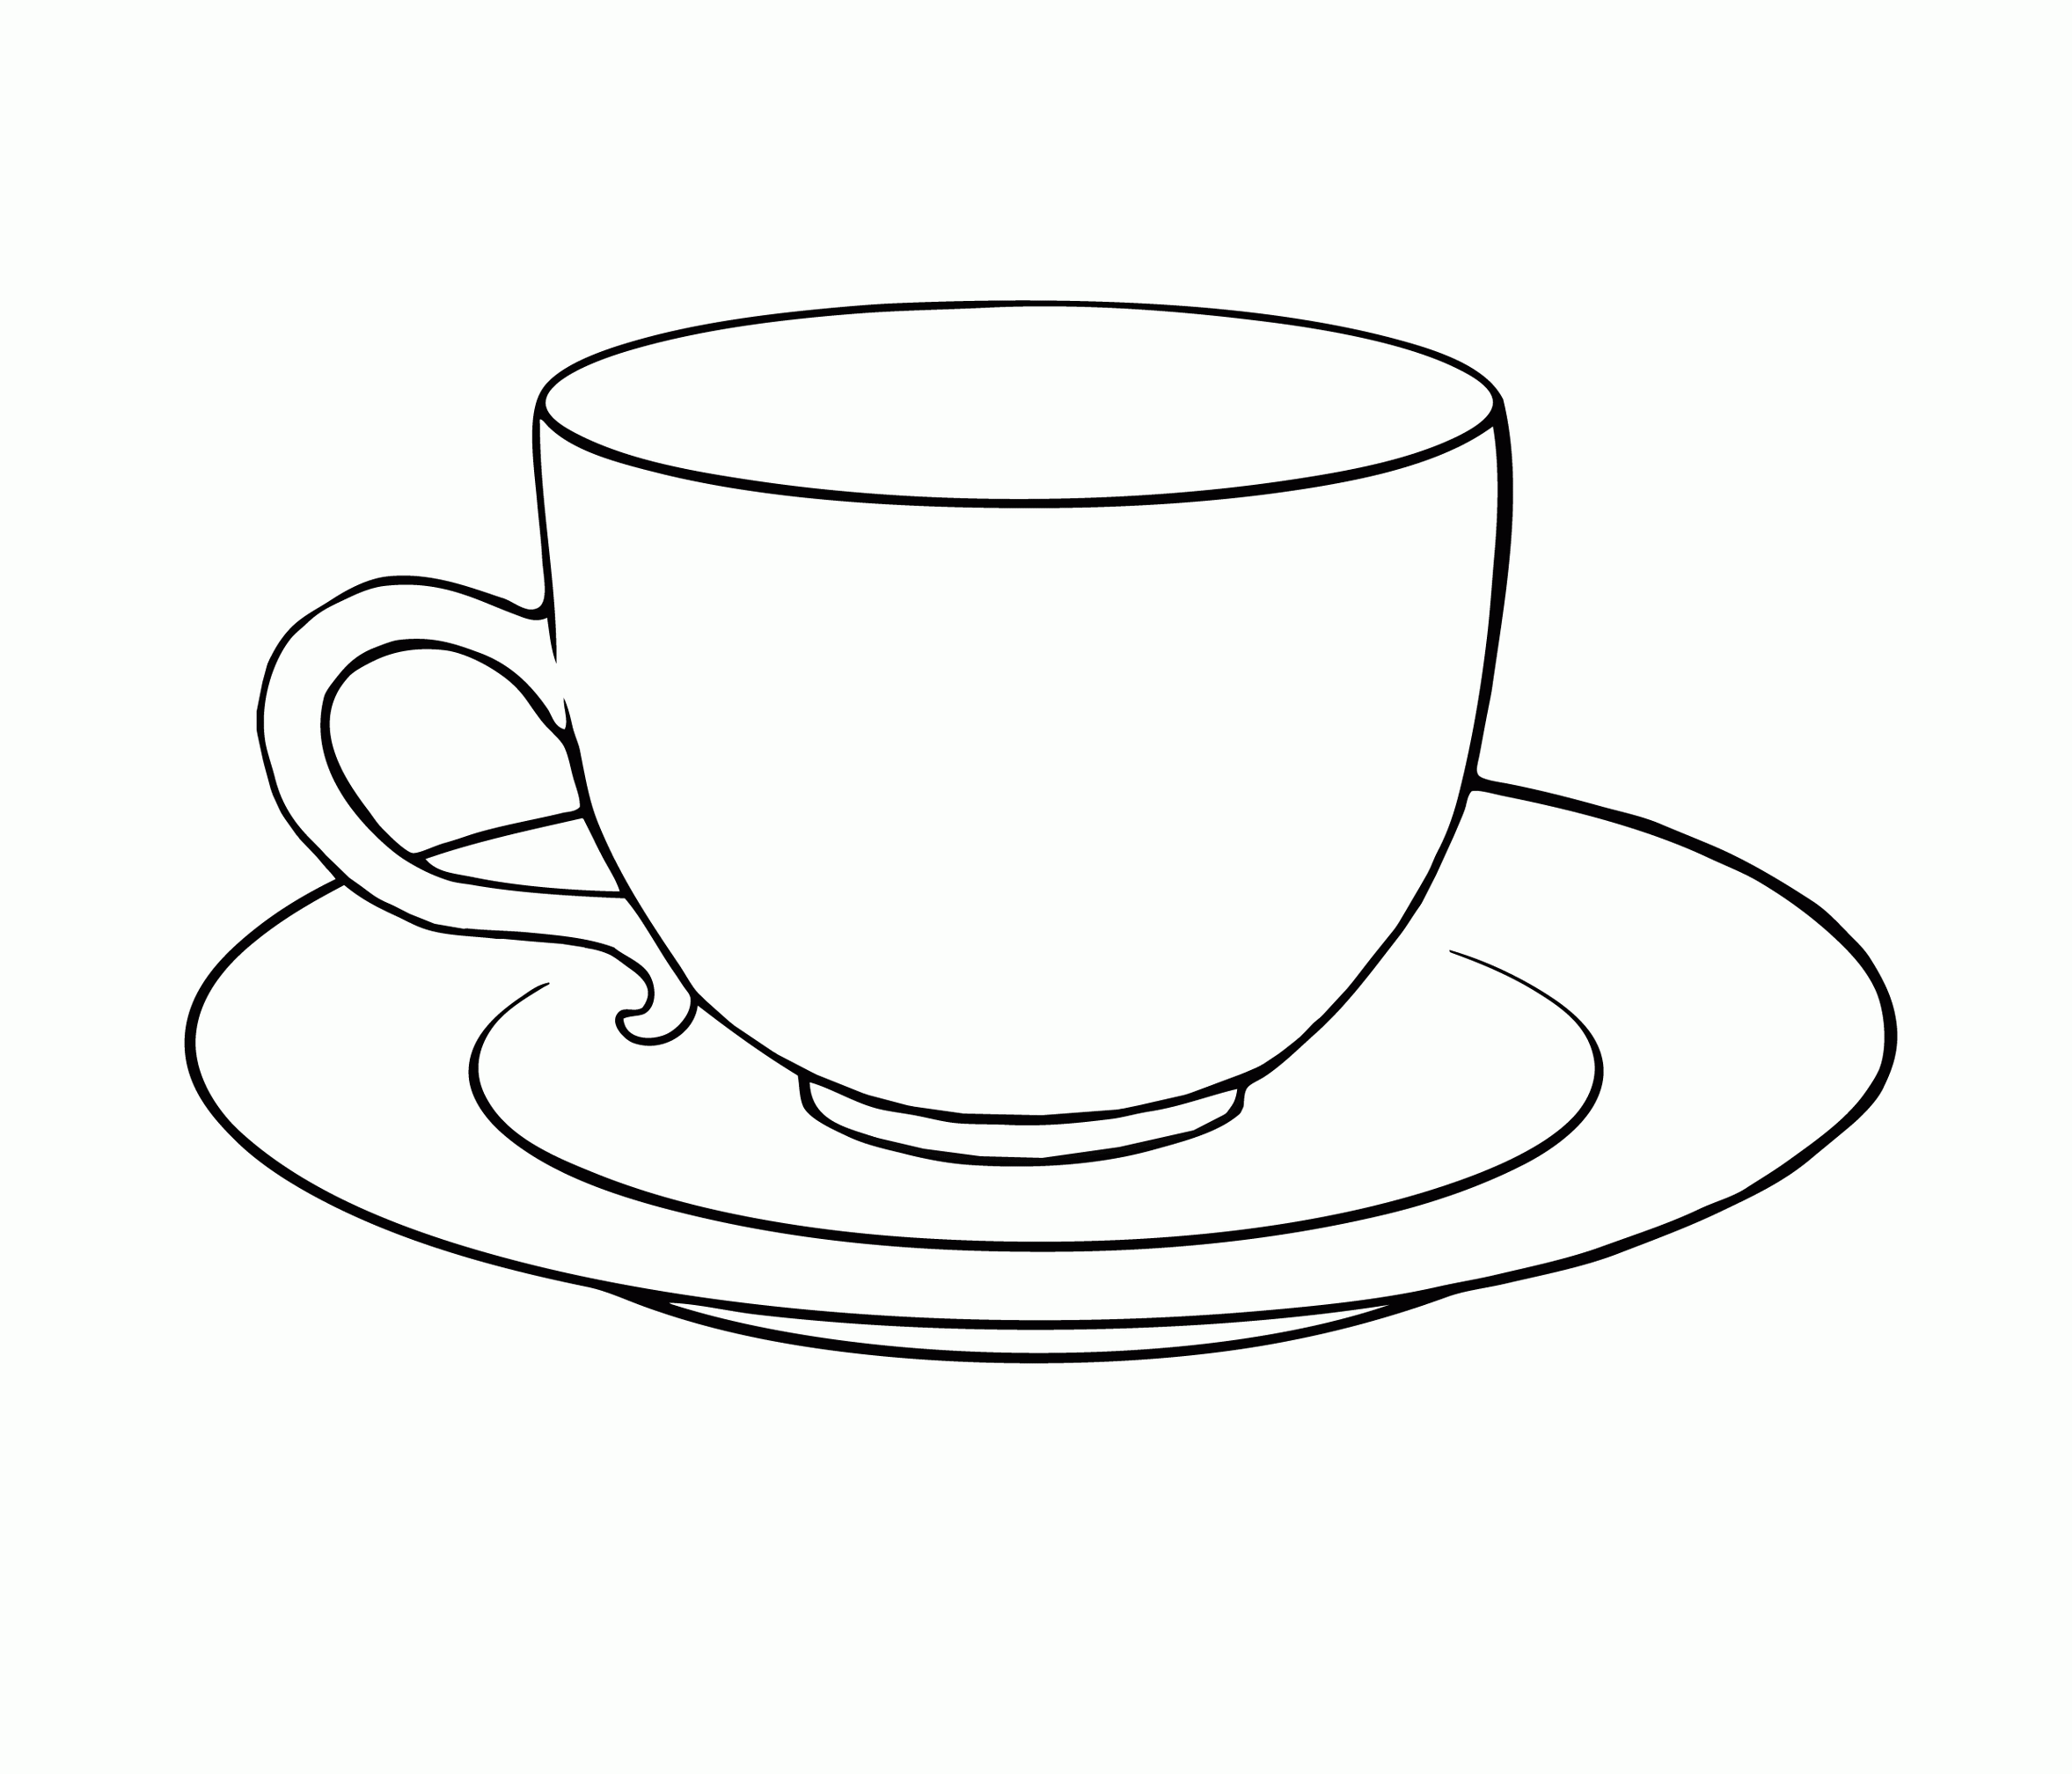 tea-cup-colouring-page-clipart-to-use-clip-art-resource-coloring-home